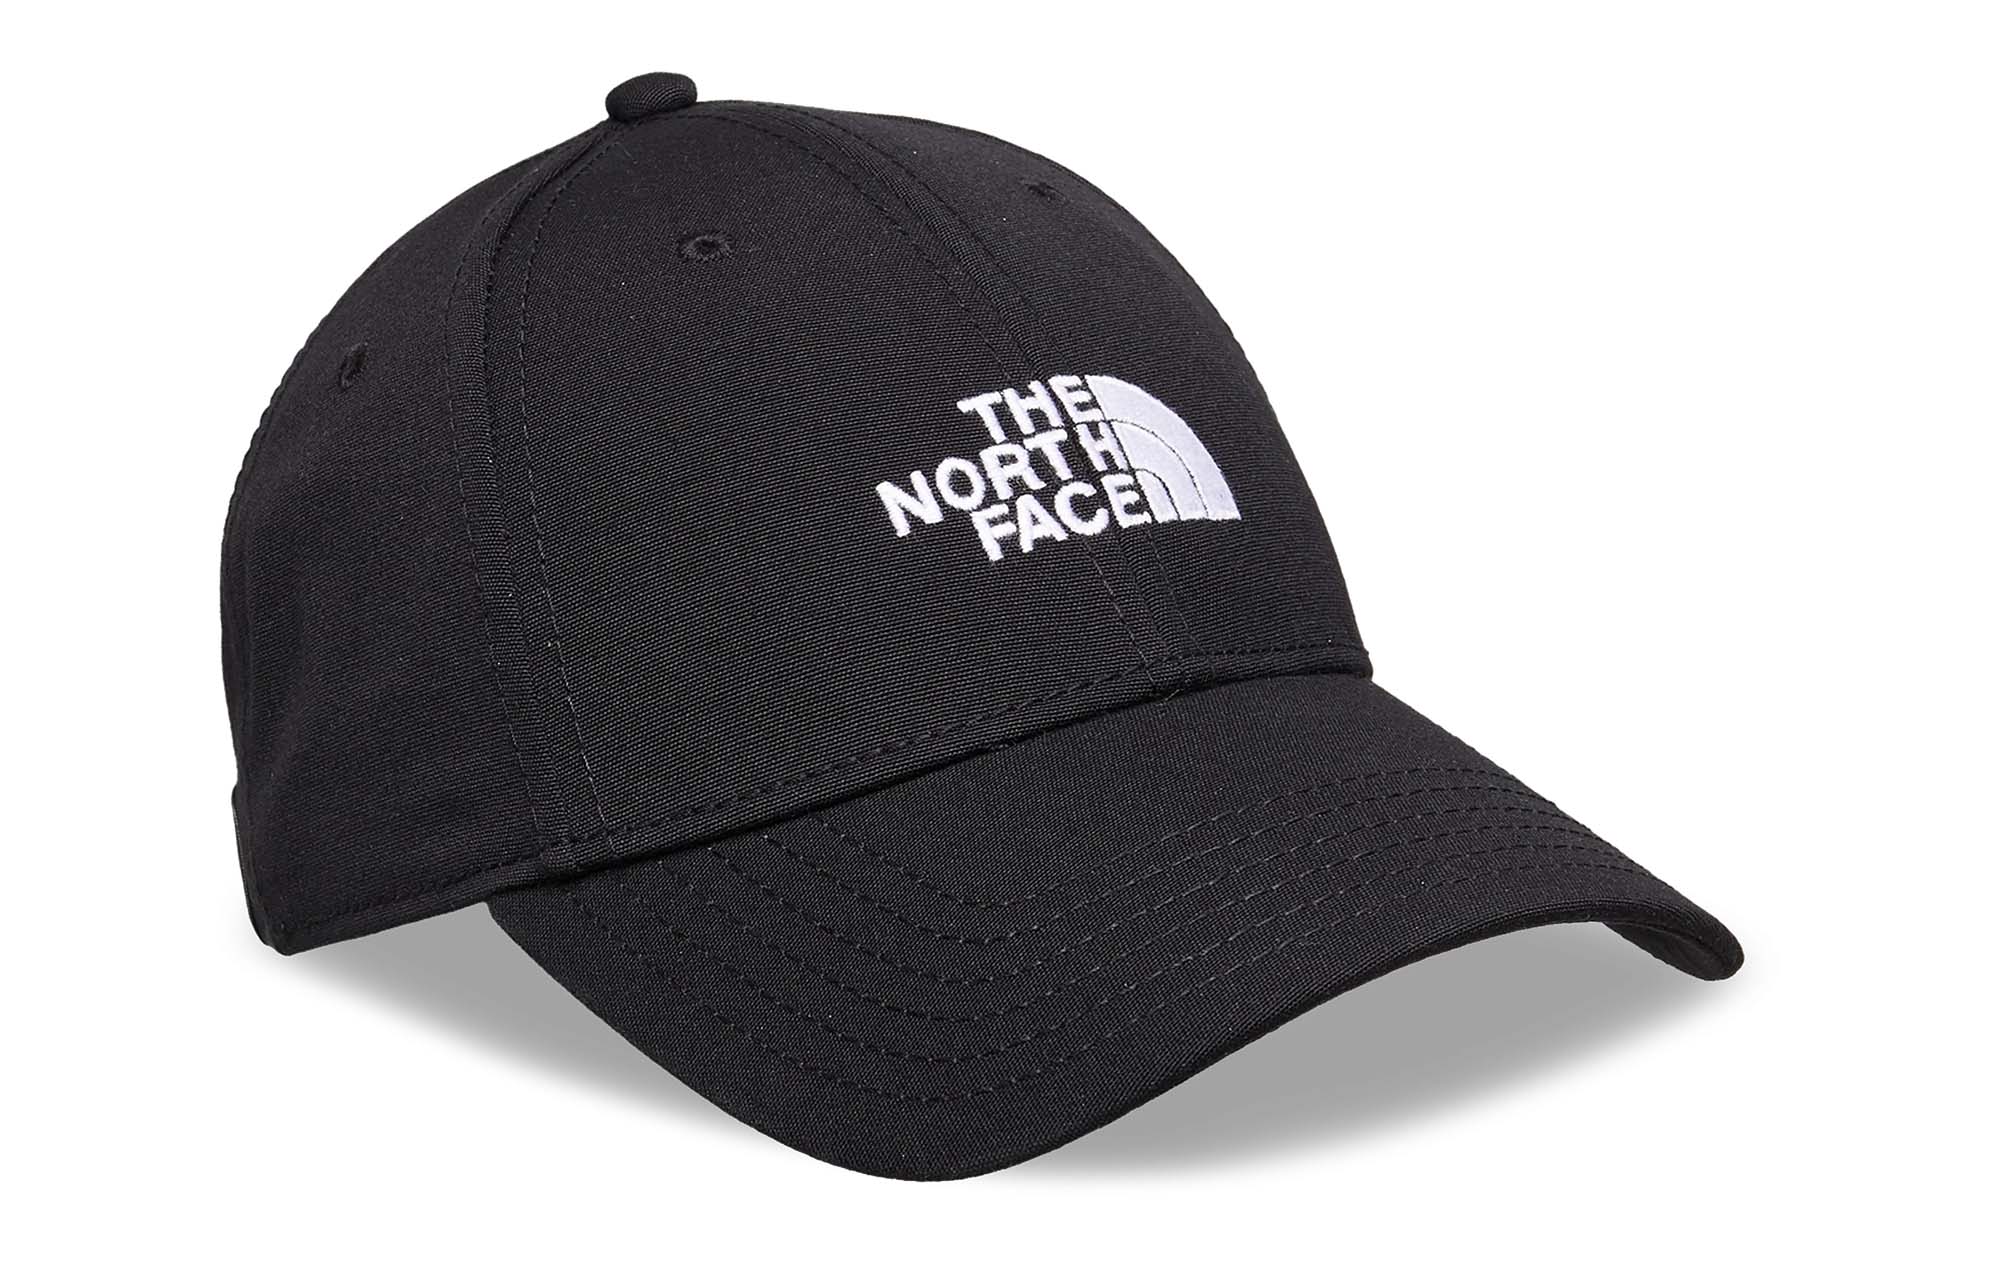 THE NORTH FACE RCYD 66 classic hat